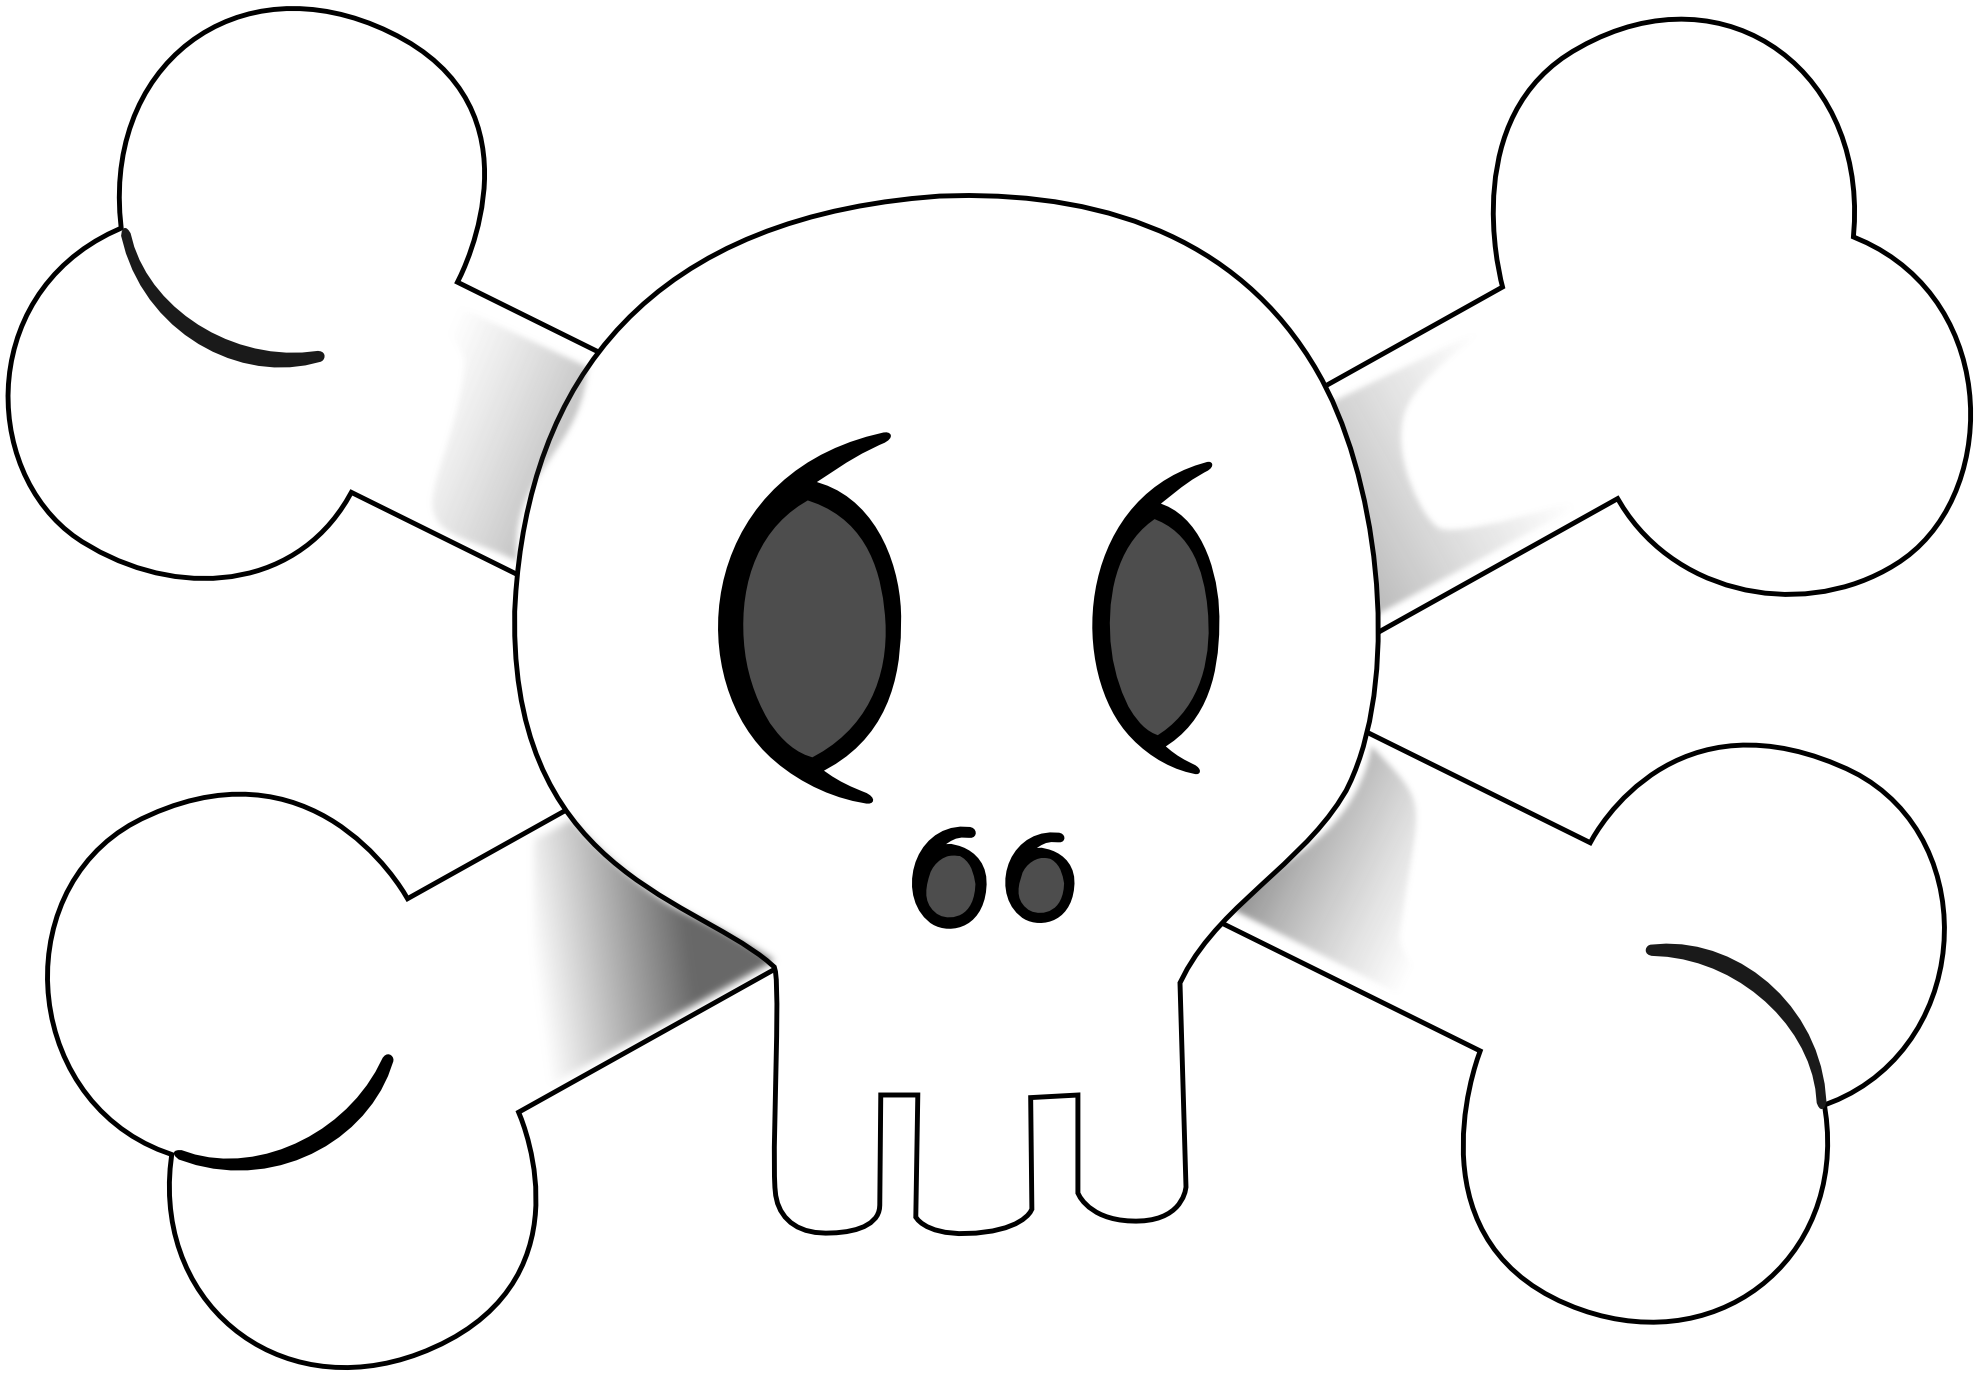 pirate flag clipart black and - Pirate Flag Clip Art